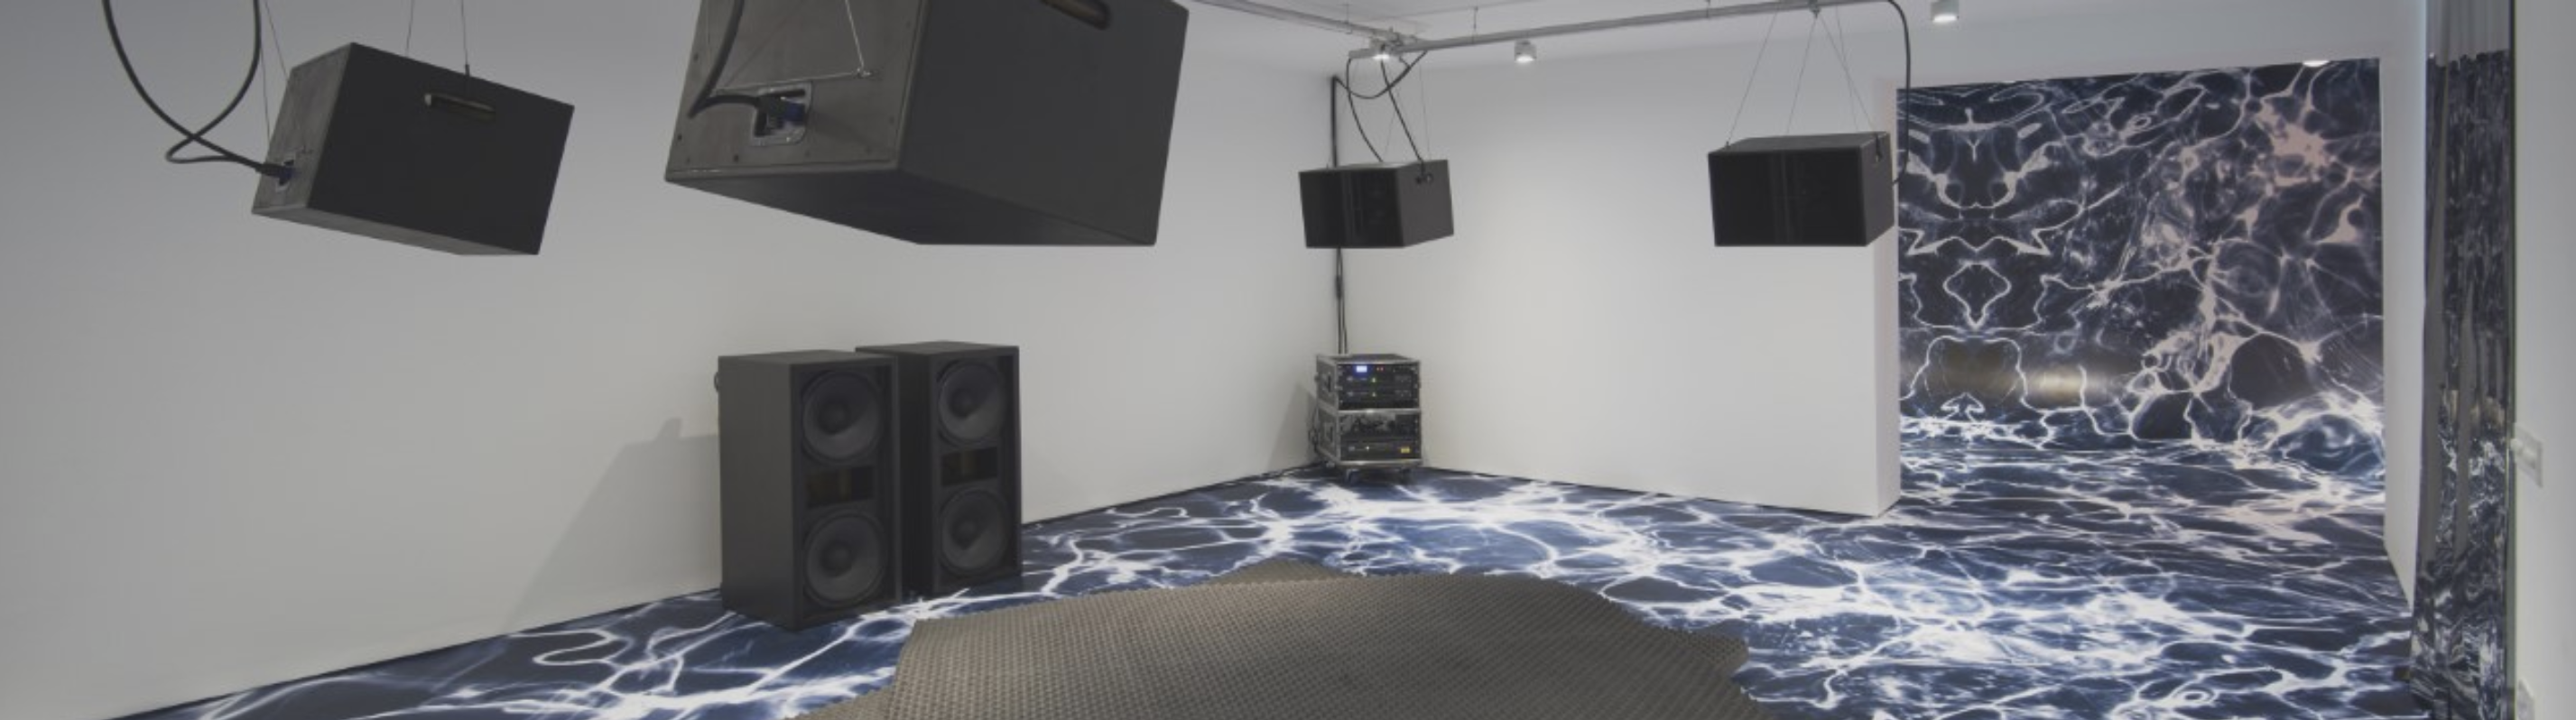 An art installation with speakers and a blue and white floor and wall covering